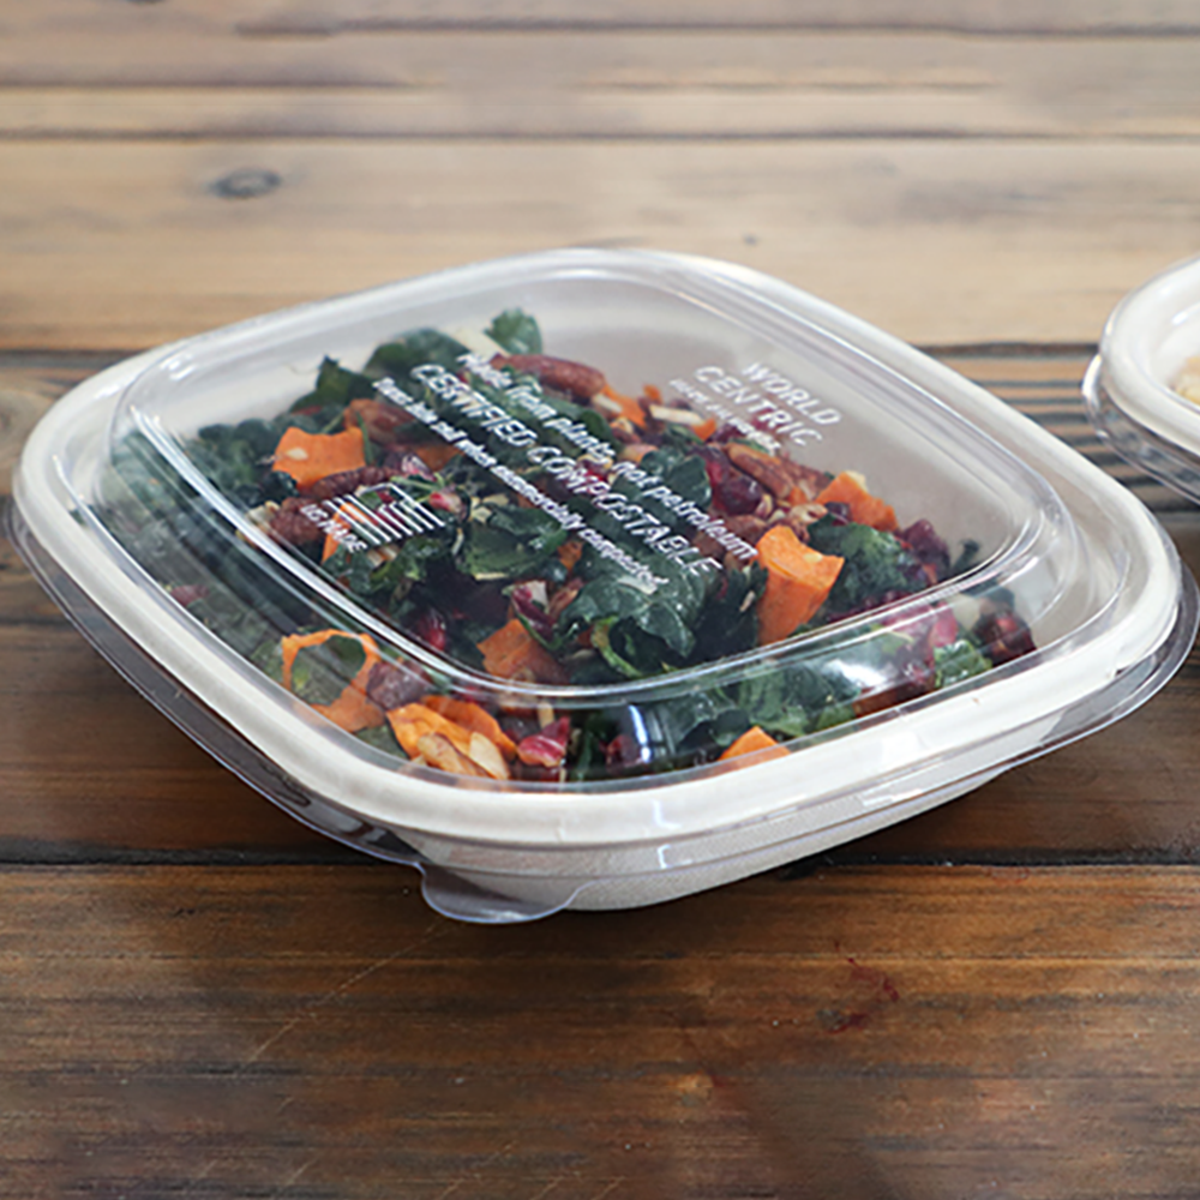 Take Out - To Go Containers - Page 1 - BioandChic